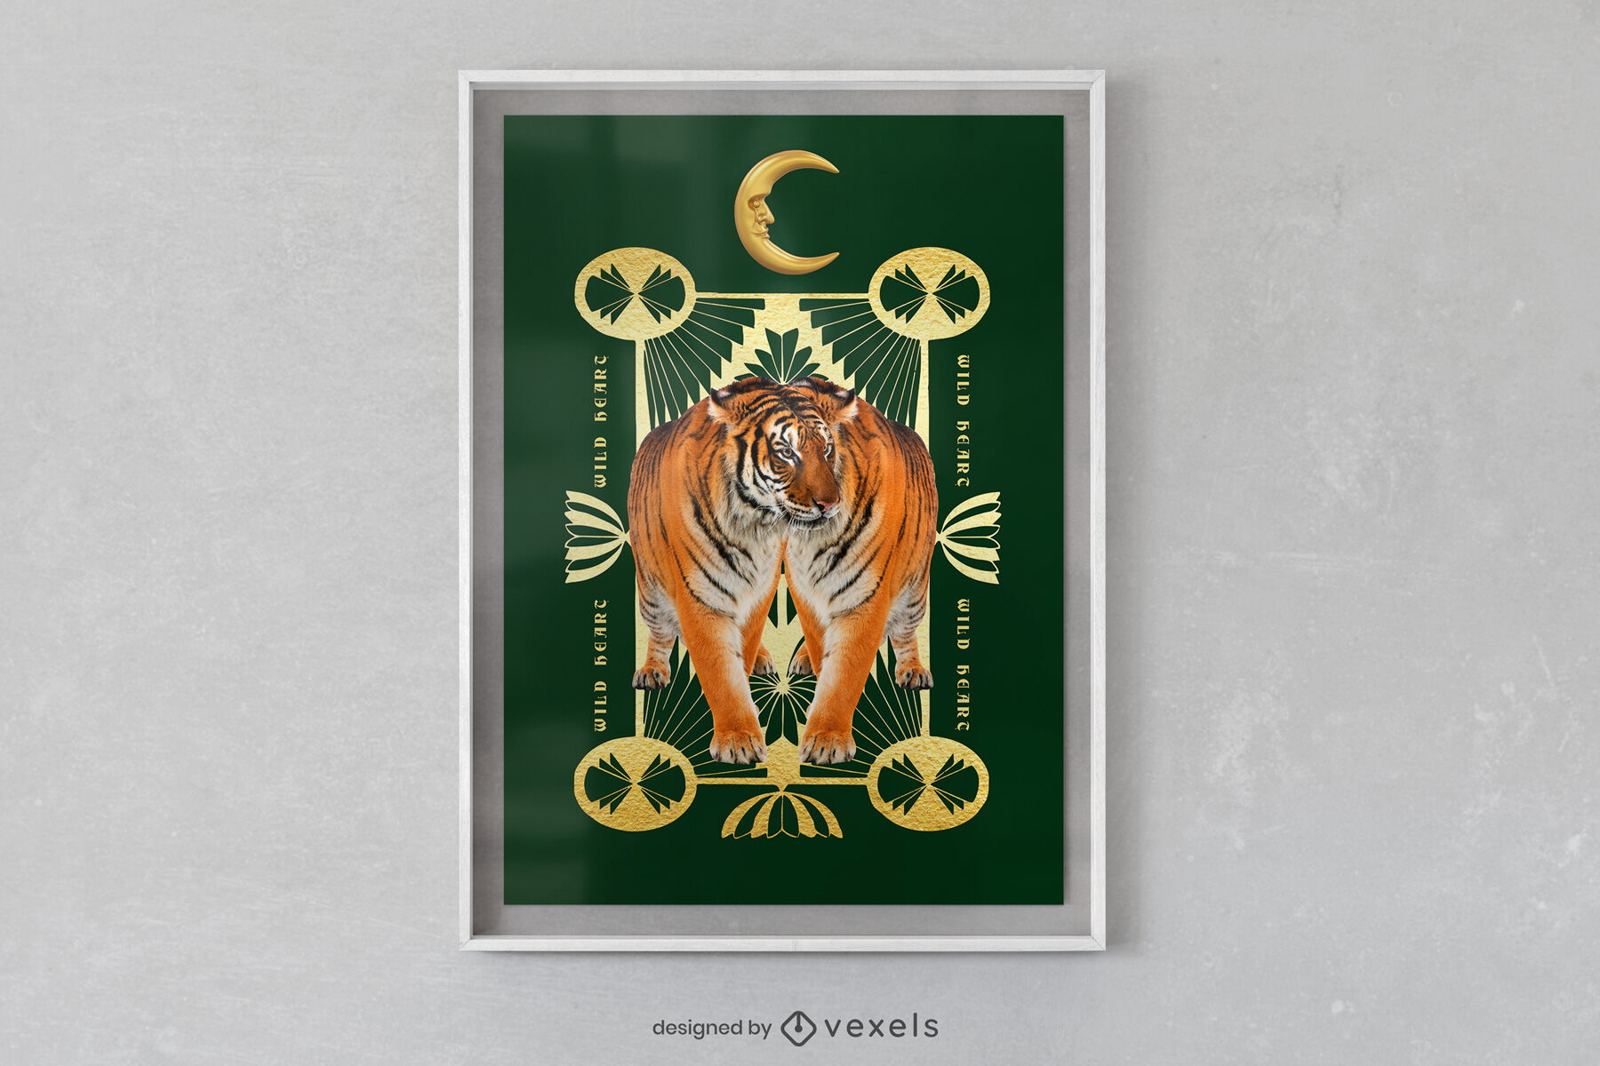 Mirrored tiger quote poster design